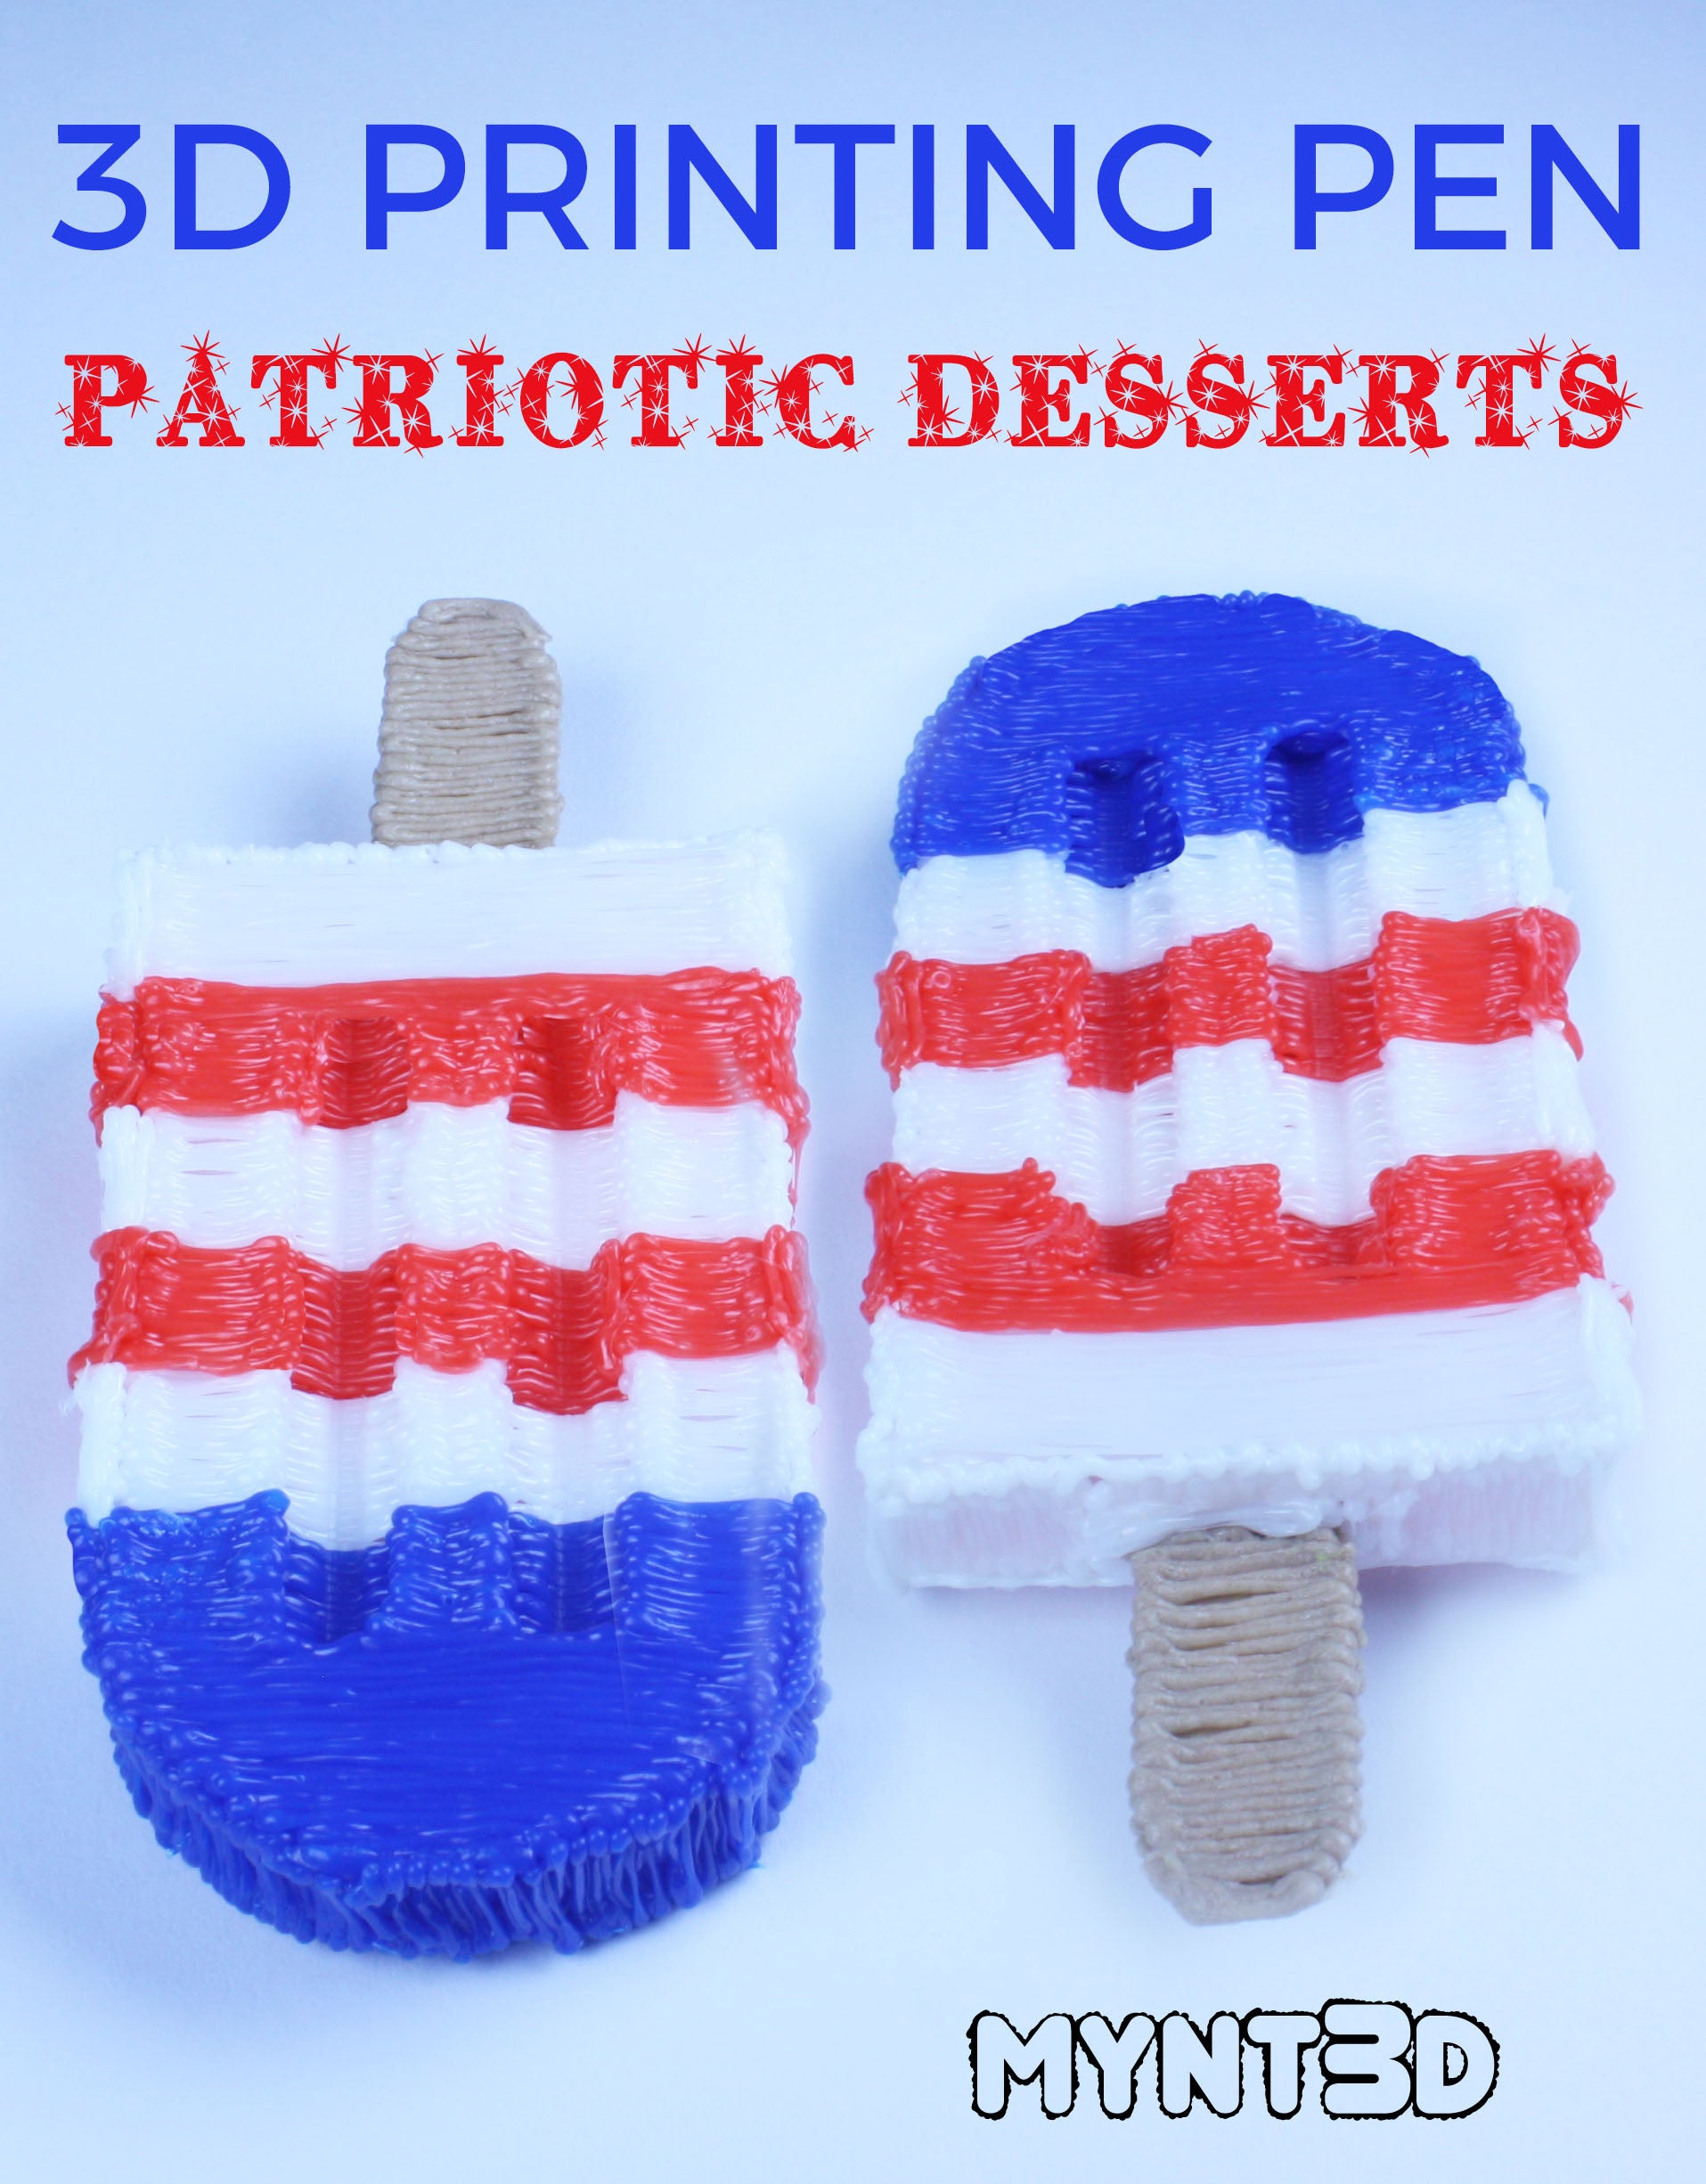 Patriotic Desserts Made with a 3D Pen